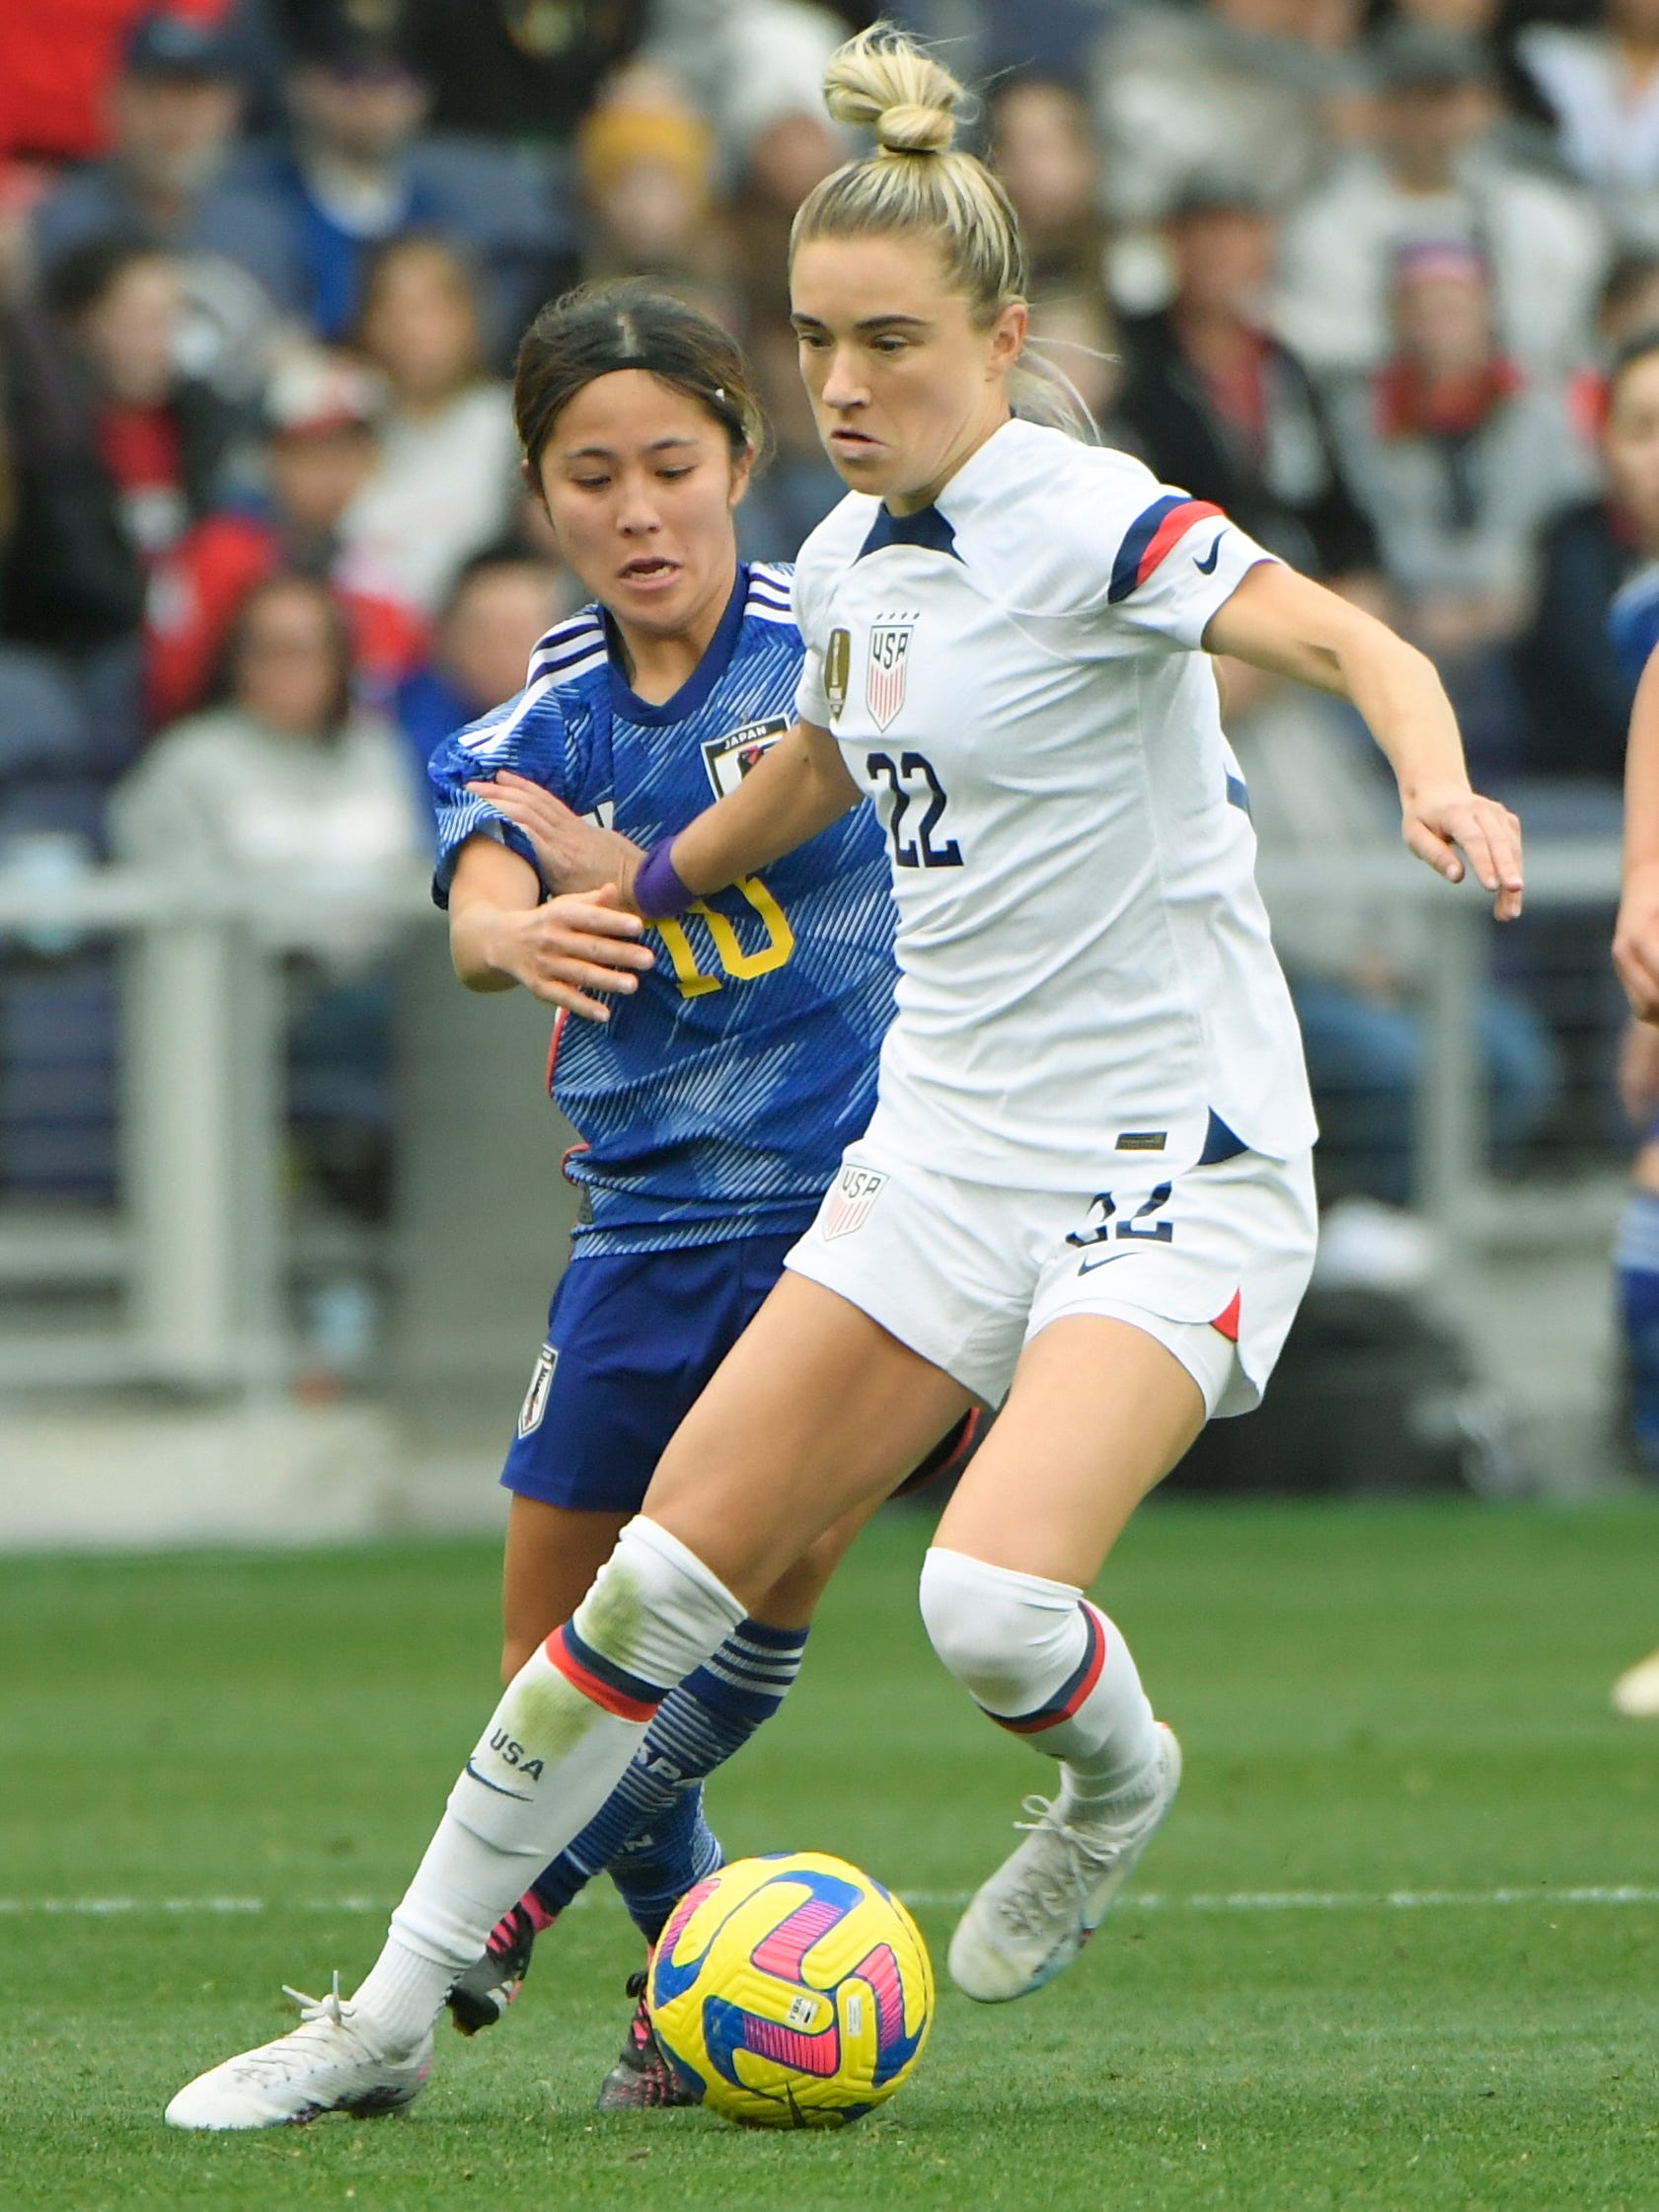 An action image of Kristie Mewis playing soccer.